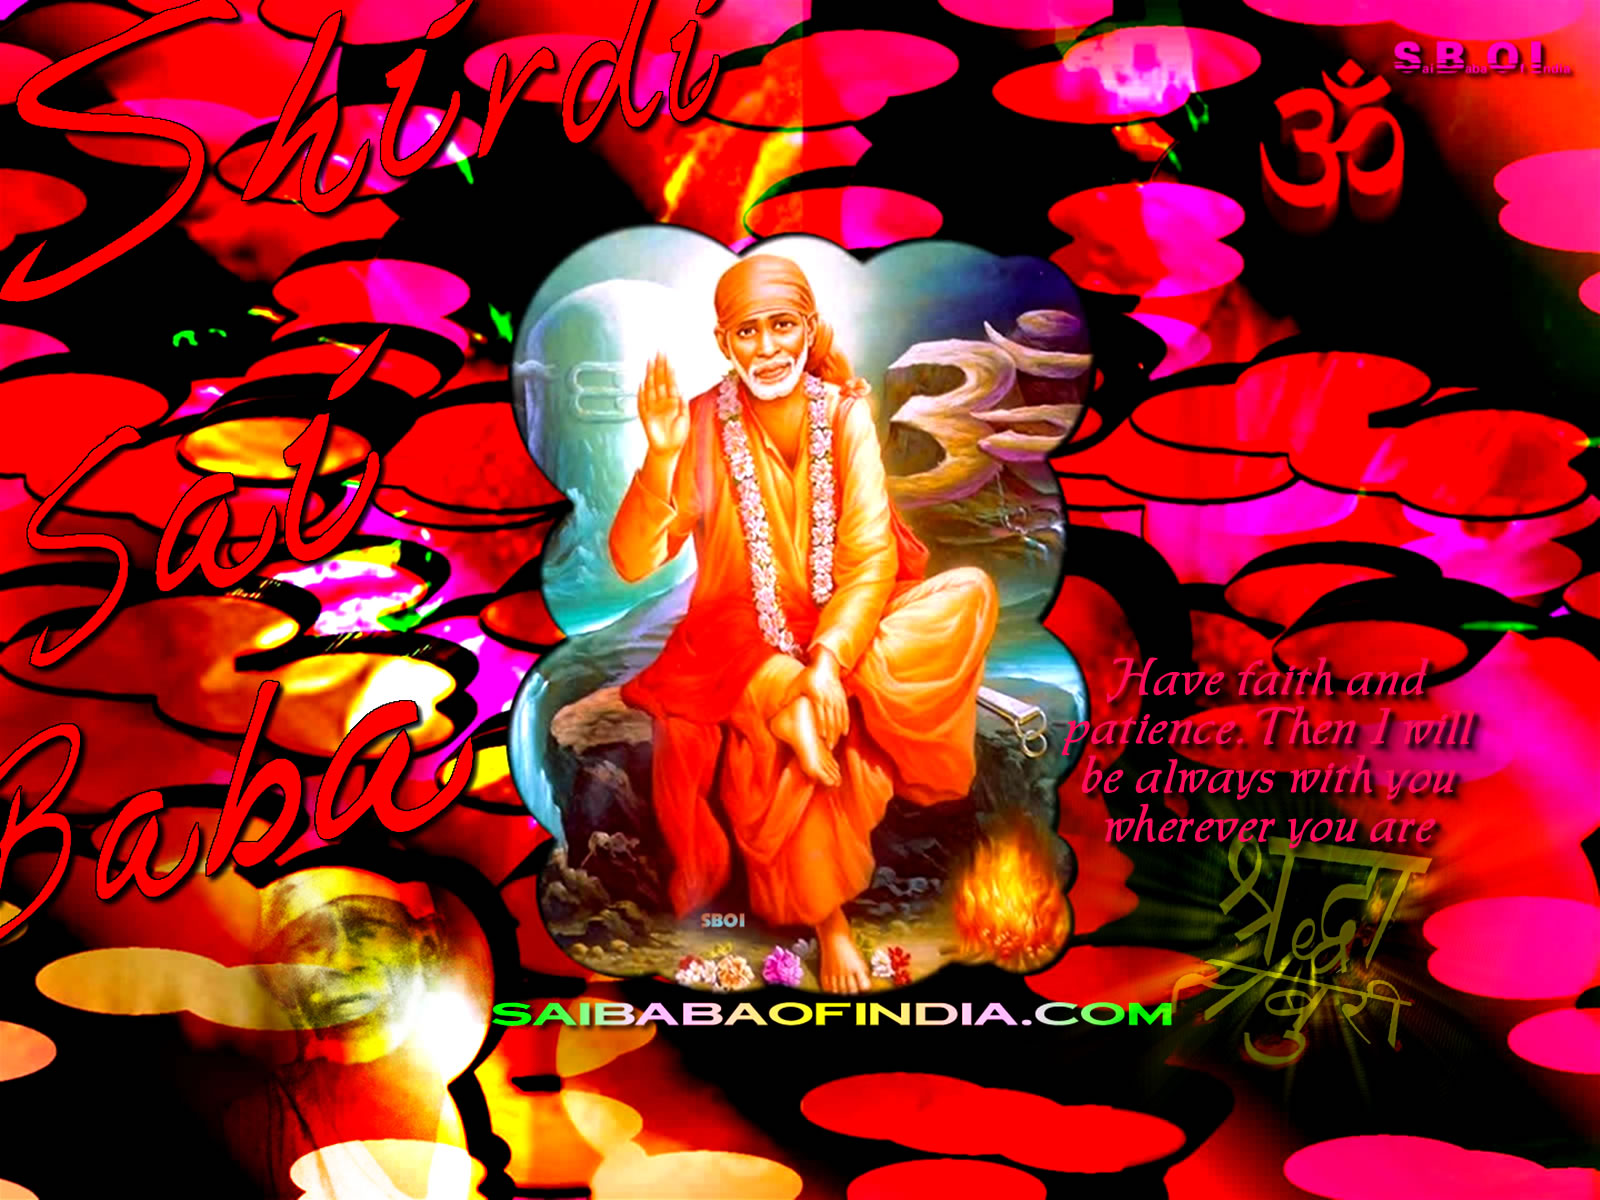 Sai Baba Wallpapers Photos- free download- Desktop backgrounds - animated  wallpapers